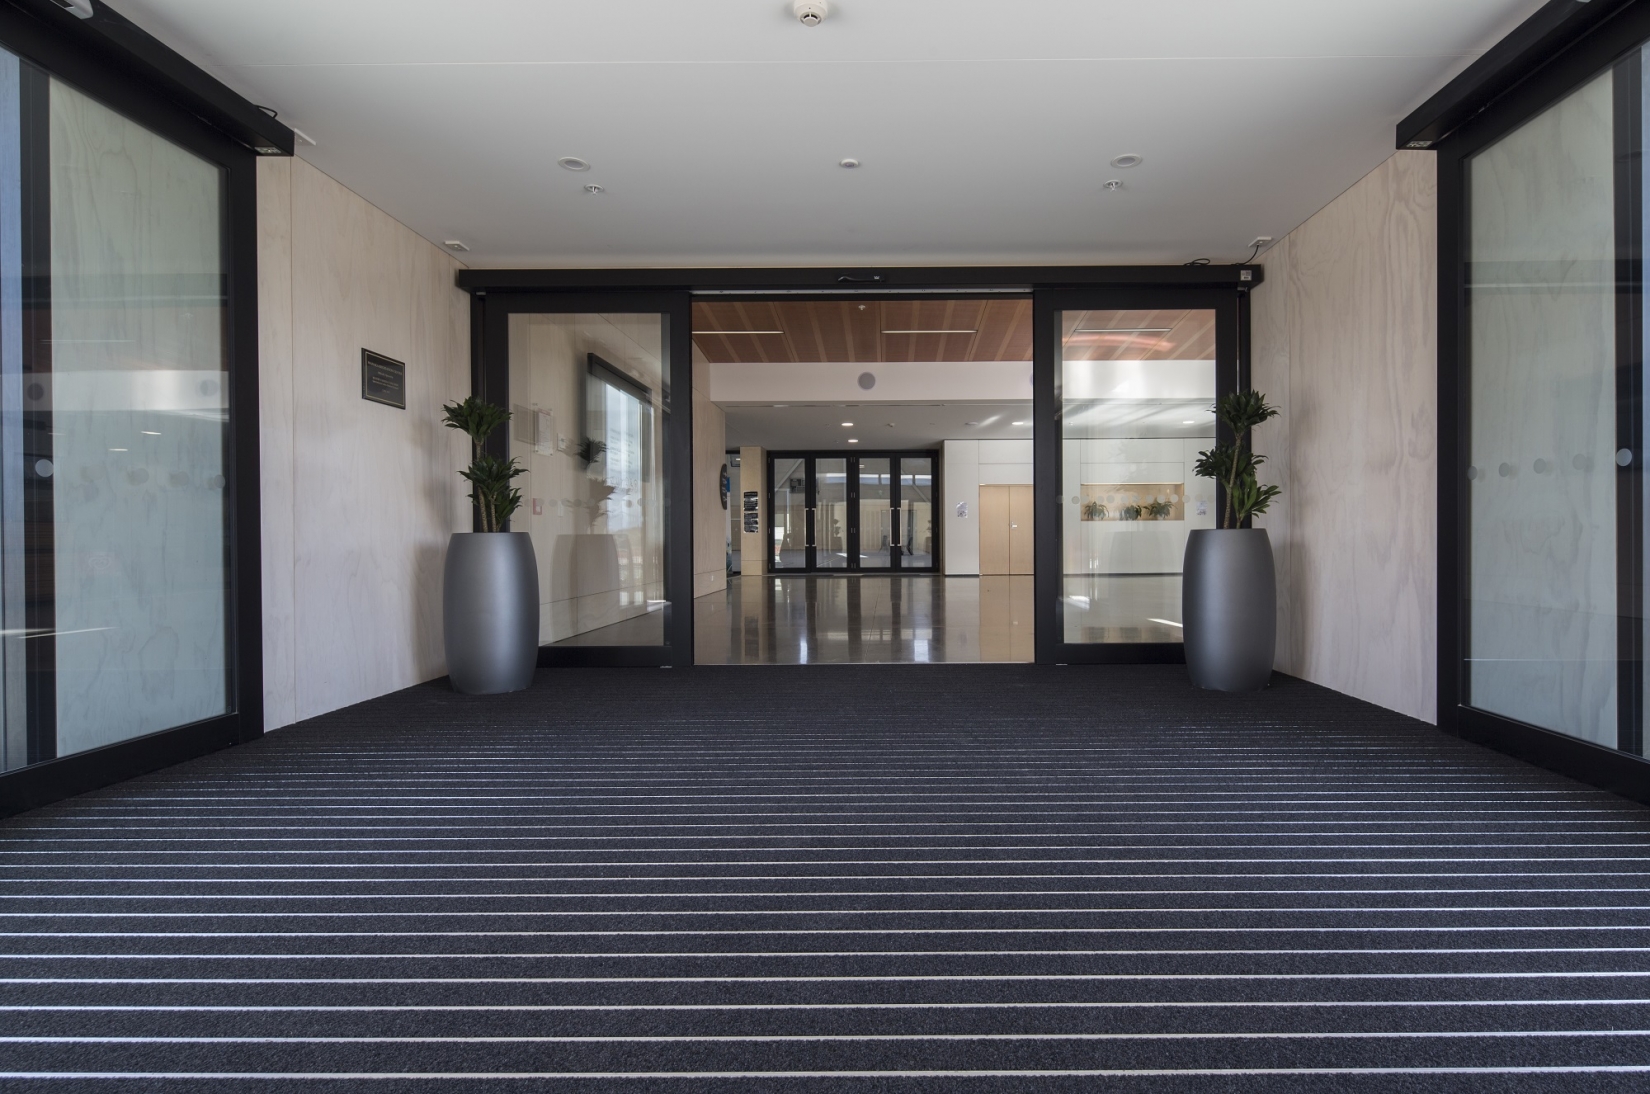 Why commercial entrance matting is key to building safety